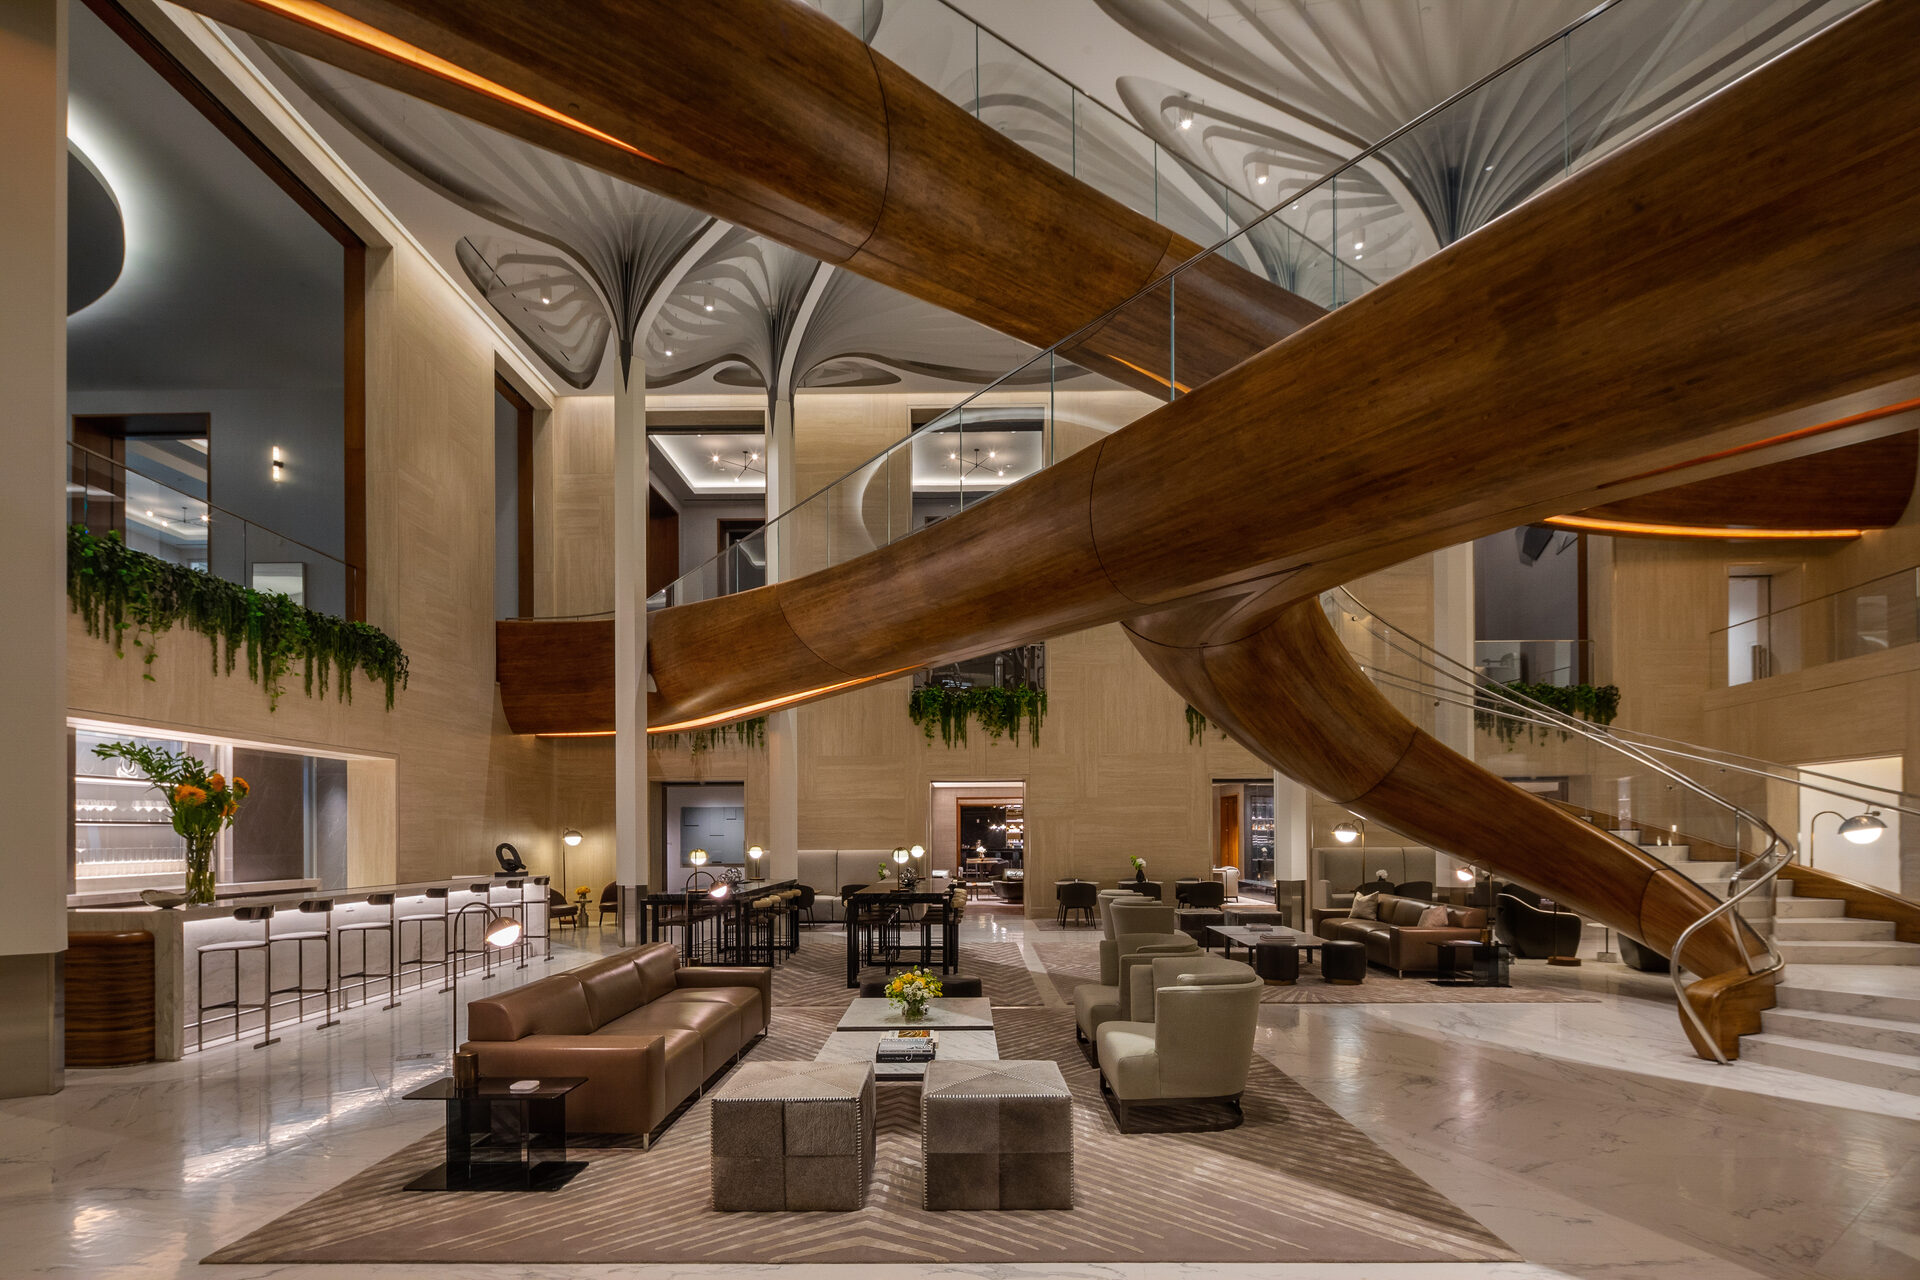 Modern hotel lobby with luxurious wooden design elements and elegant spiral staircase.